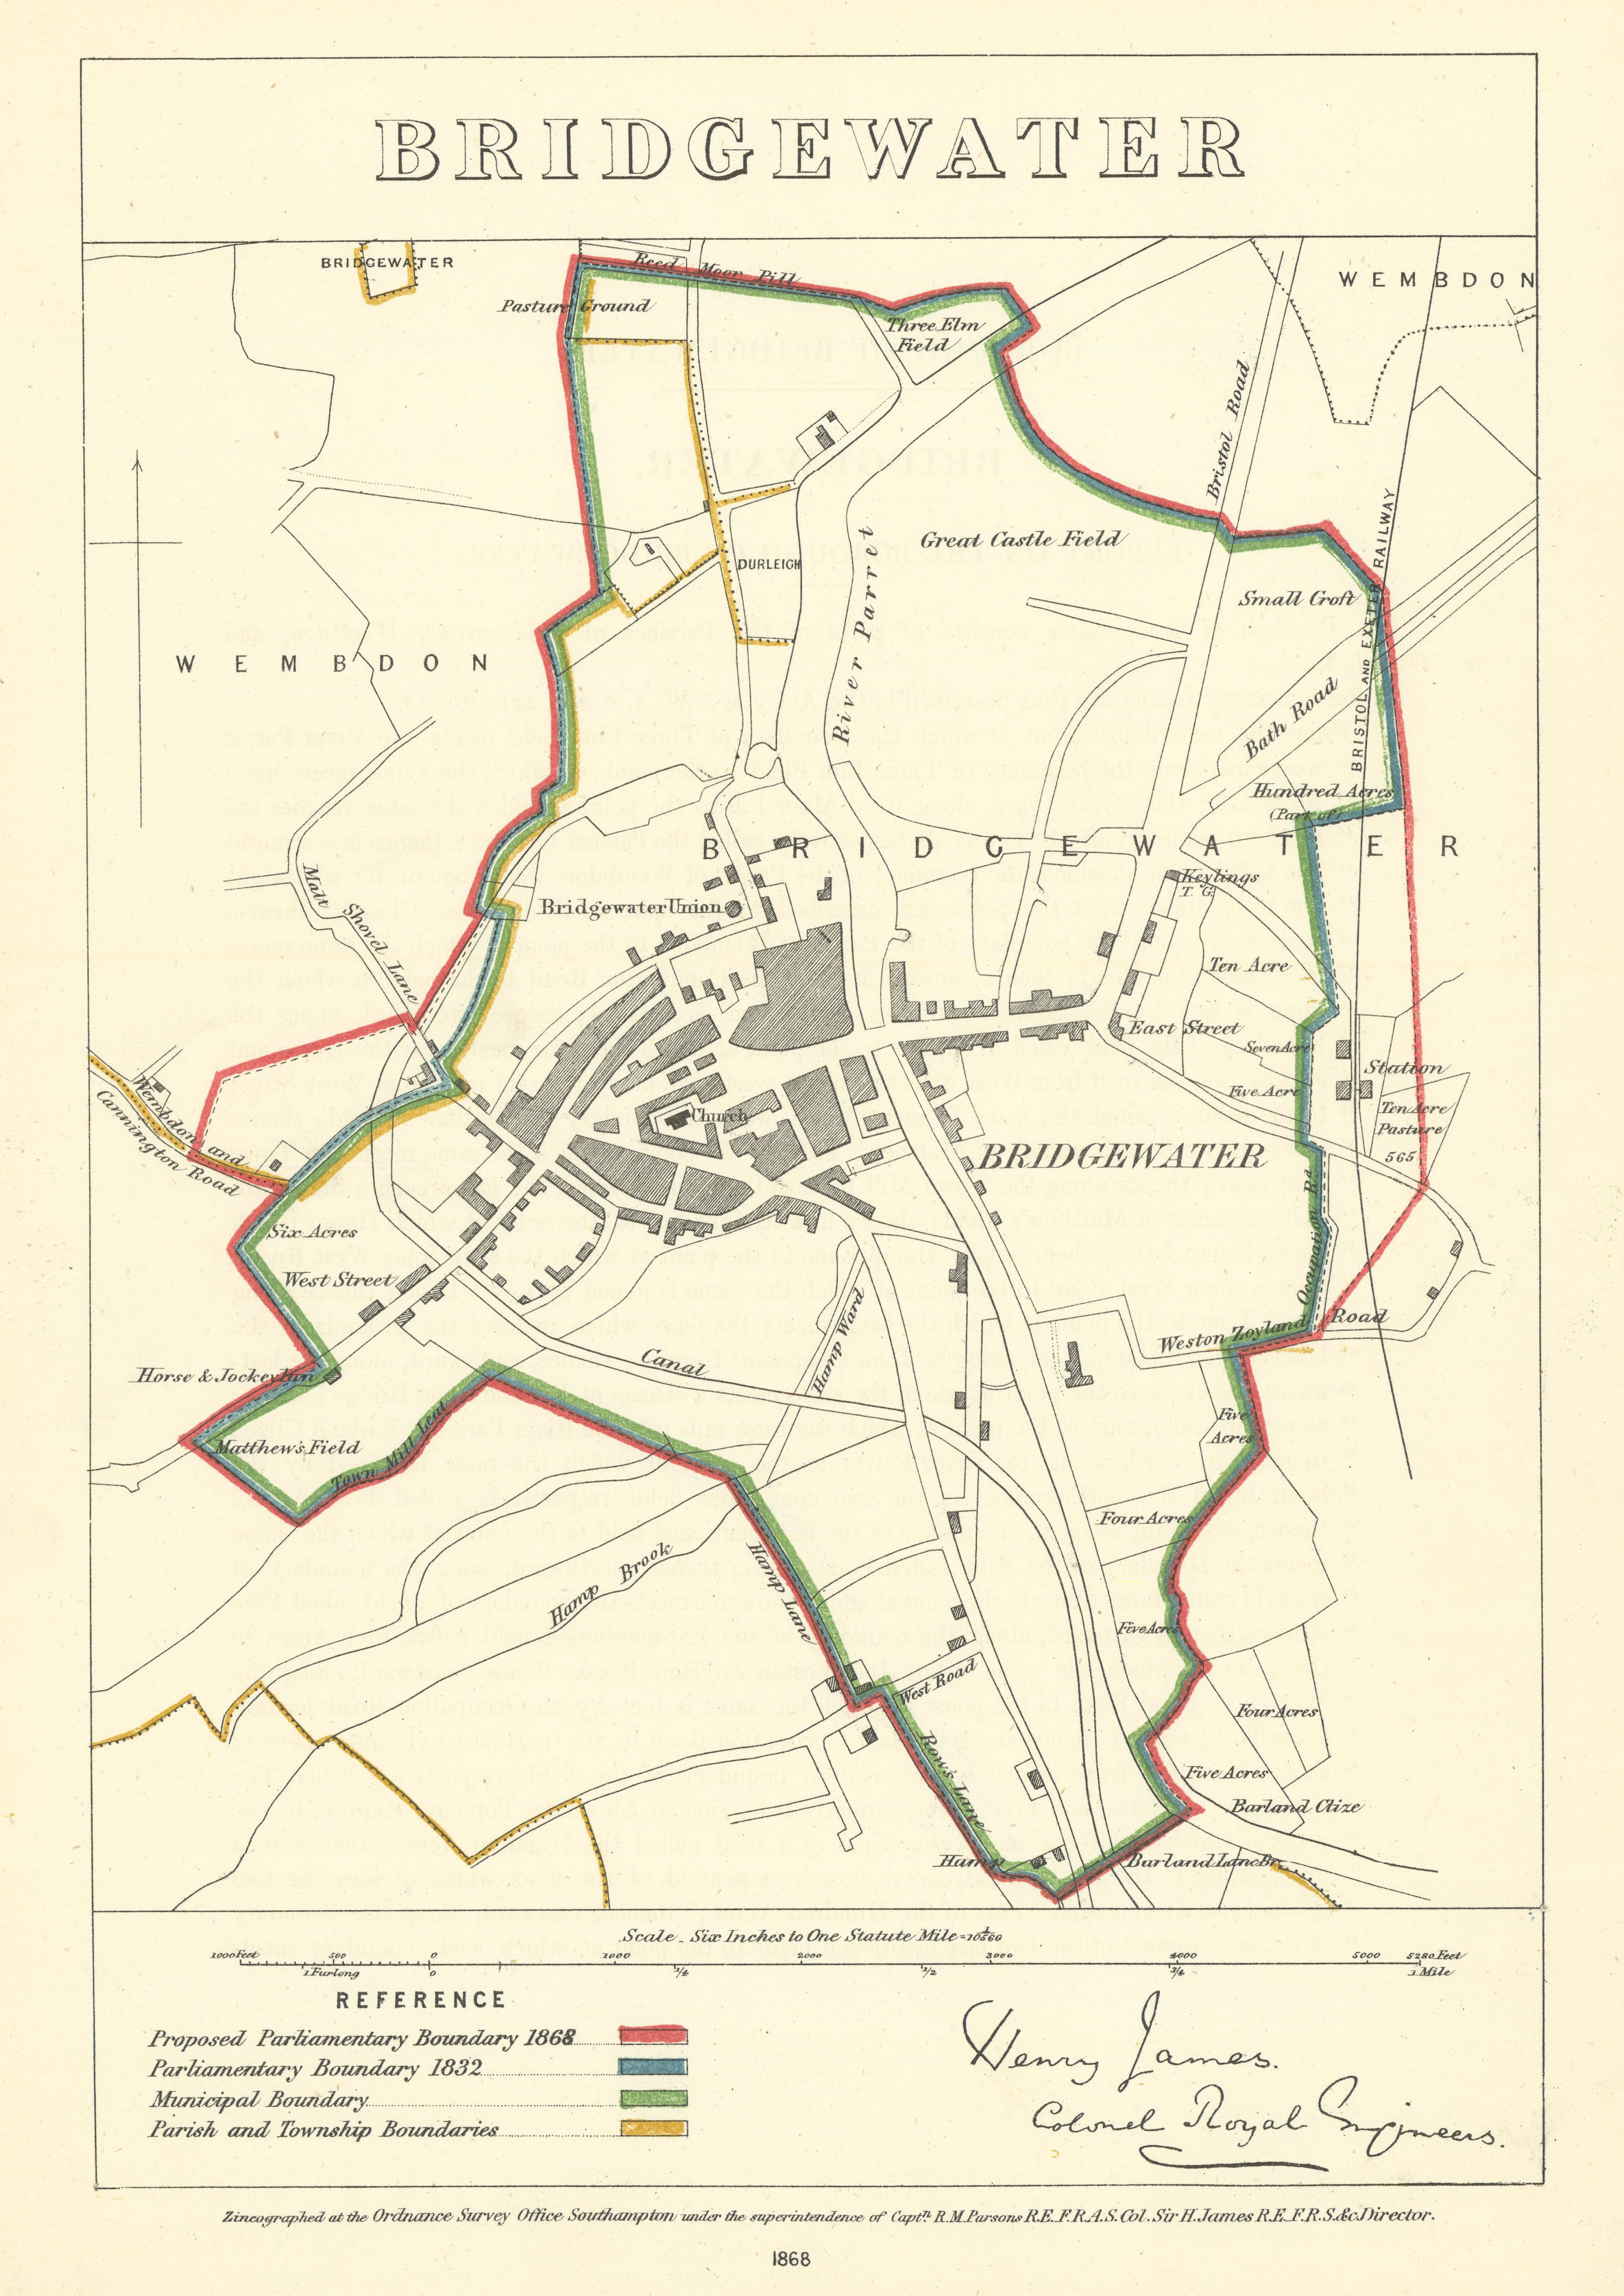 Associate Product Bridgwater, Somerset. JAMES. Parliamentary Boundary Commission 1868 old map